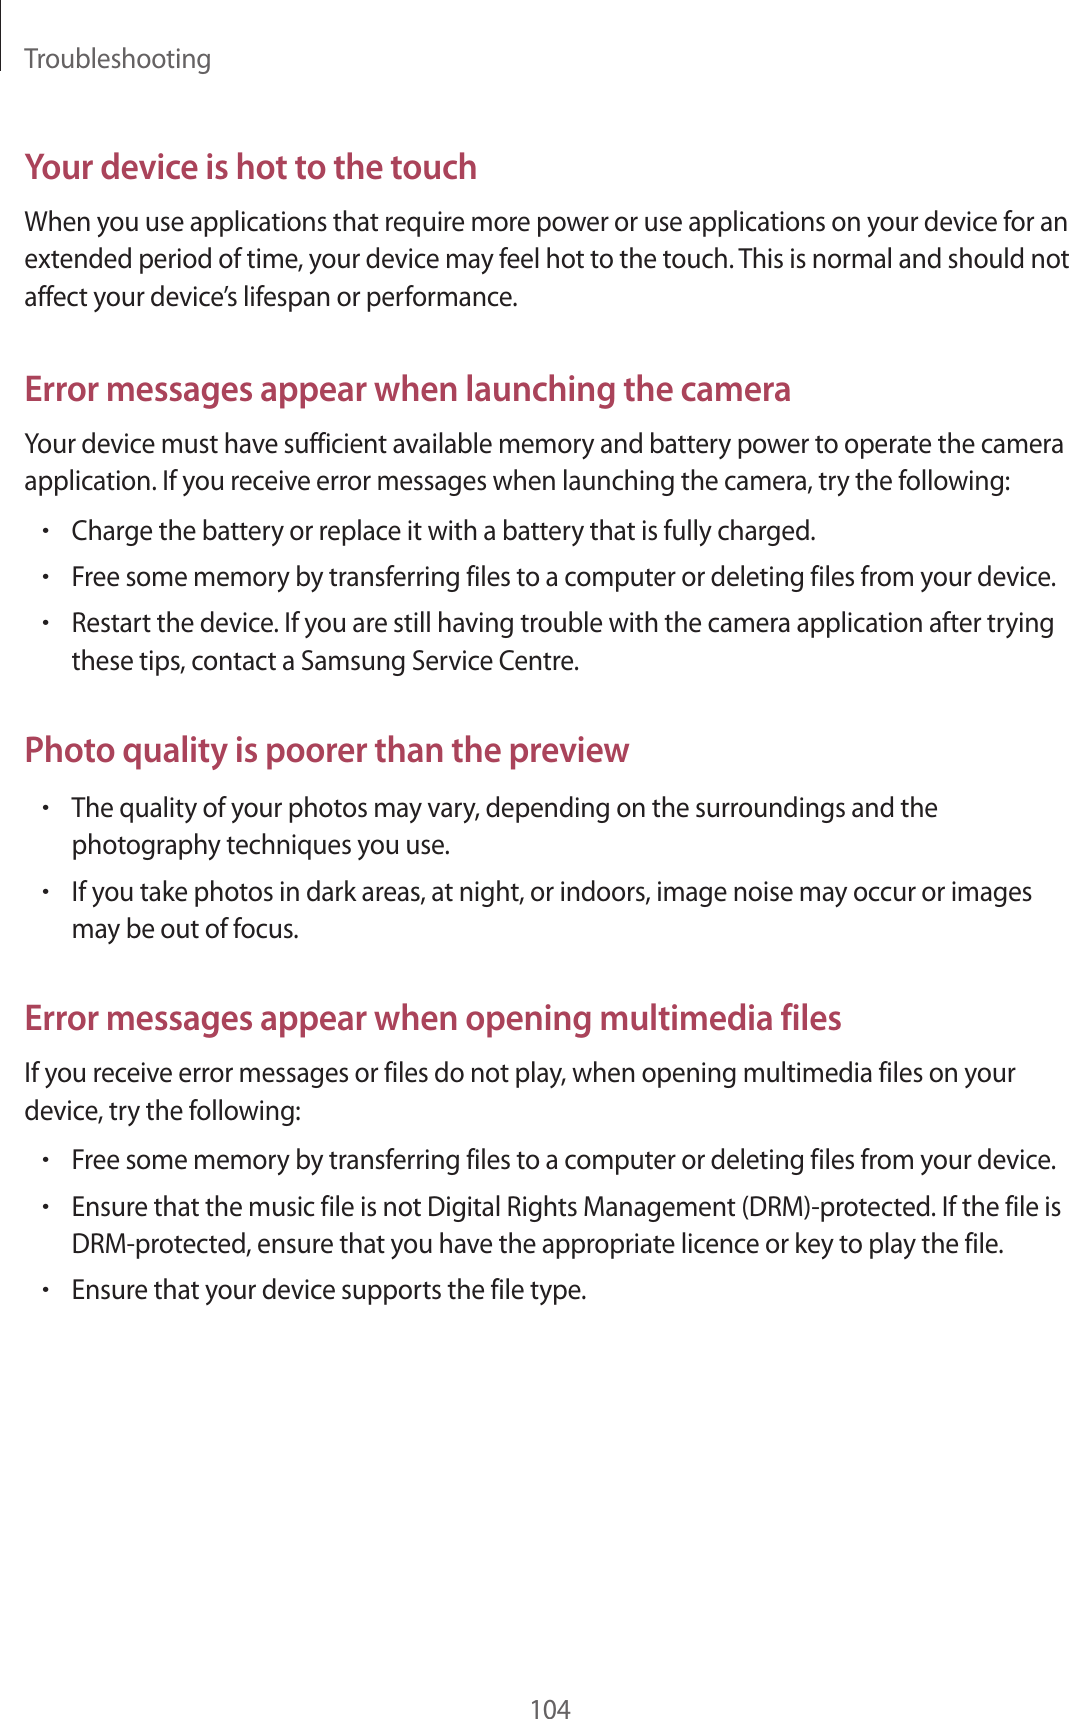 Troubleshooting104Your device is hot to the touchWhen you use applications that require more power or use applications on your device for an extended period of time, your device may feel hot to the touch. This is normal and should not affect your device’s lifespan or performance.Error messages appear when launching the cameraYour device must have sufficient available memory and battery power to operate the camera application. If you receive error messages when launching the camera, try the following:•Charge the battery or replace it with a battery that is fully charged.•Free some memory by transferring files to a computer or deleting files from your device.•Restart the device. If you are still having trouble with the camera application after trying these tips, contact a Samsung Service Centre.Photo quality is poorer than the preview•The quality of your photos may vary, depending on the surroundings and the photography techniques you use.•If you take photos in dark areas, at night, or indoors, image noise may occur or images may be out of focus.Error messages appear when opening multimedia filesIf you receive error messages or files do not play, when opening multimedia files on your device, try the following:•Free some memory by transferring files to a computer or deleting files from your device.•Ensure that the music file is not Digital Rights Management (DRM)-protected. If the file is DRM-protected, ensure that you have the appropriate licence or key to play the file.•Ensure that your device supports the file type.